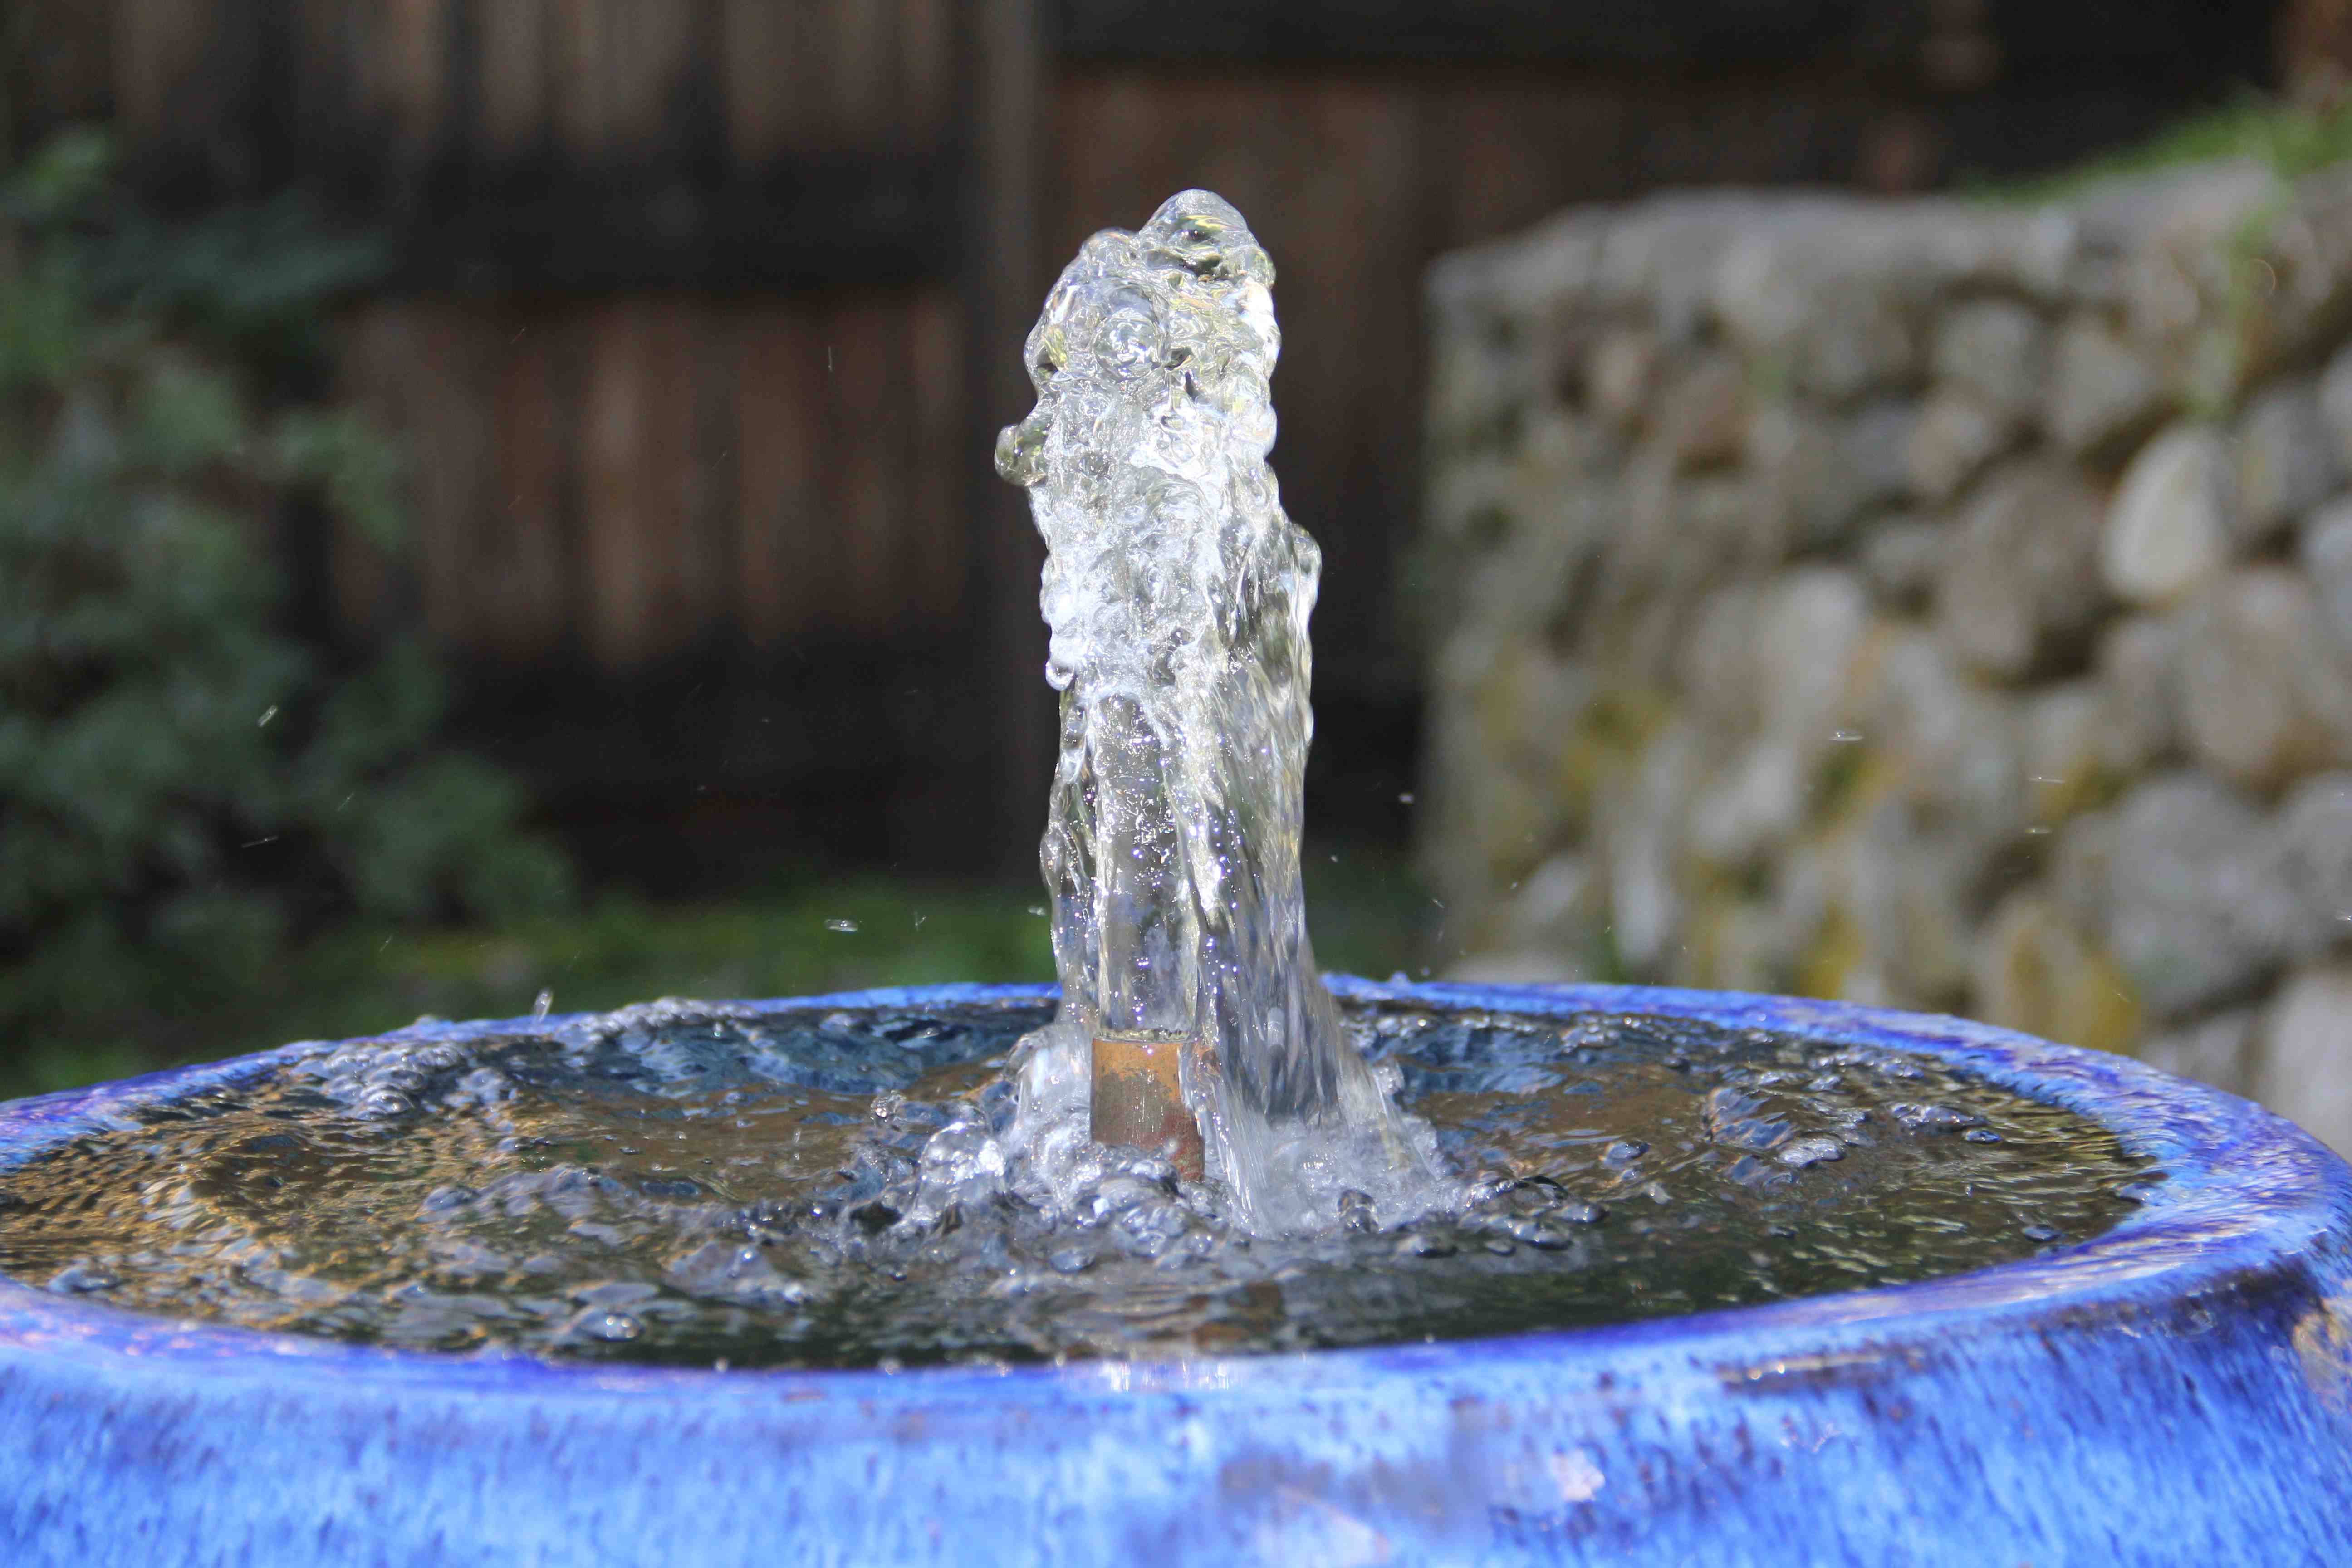 How To Build A Disappearing Water Fountain